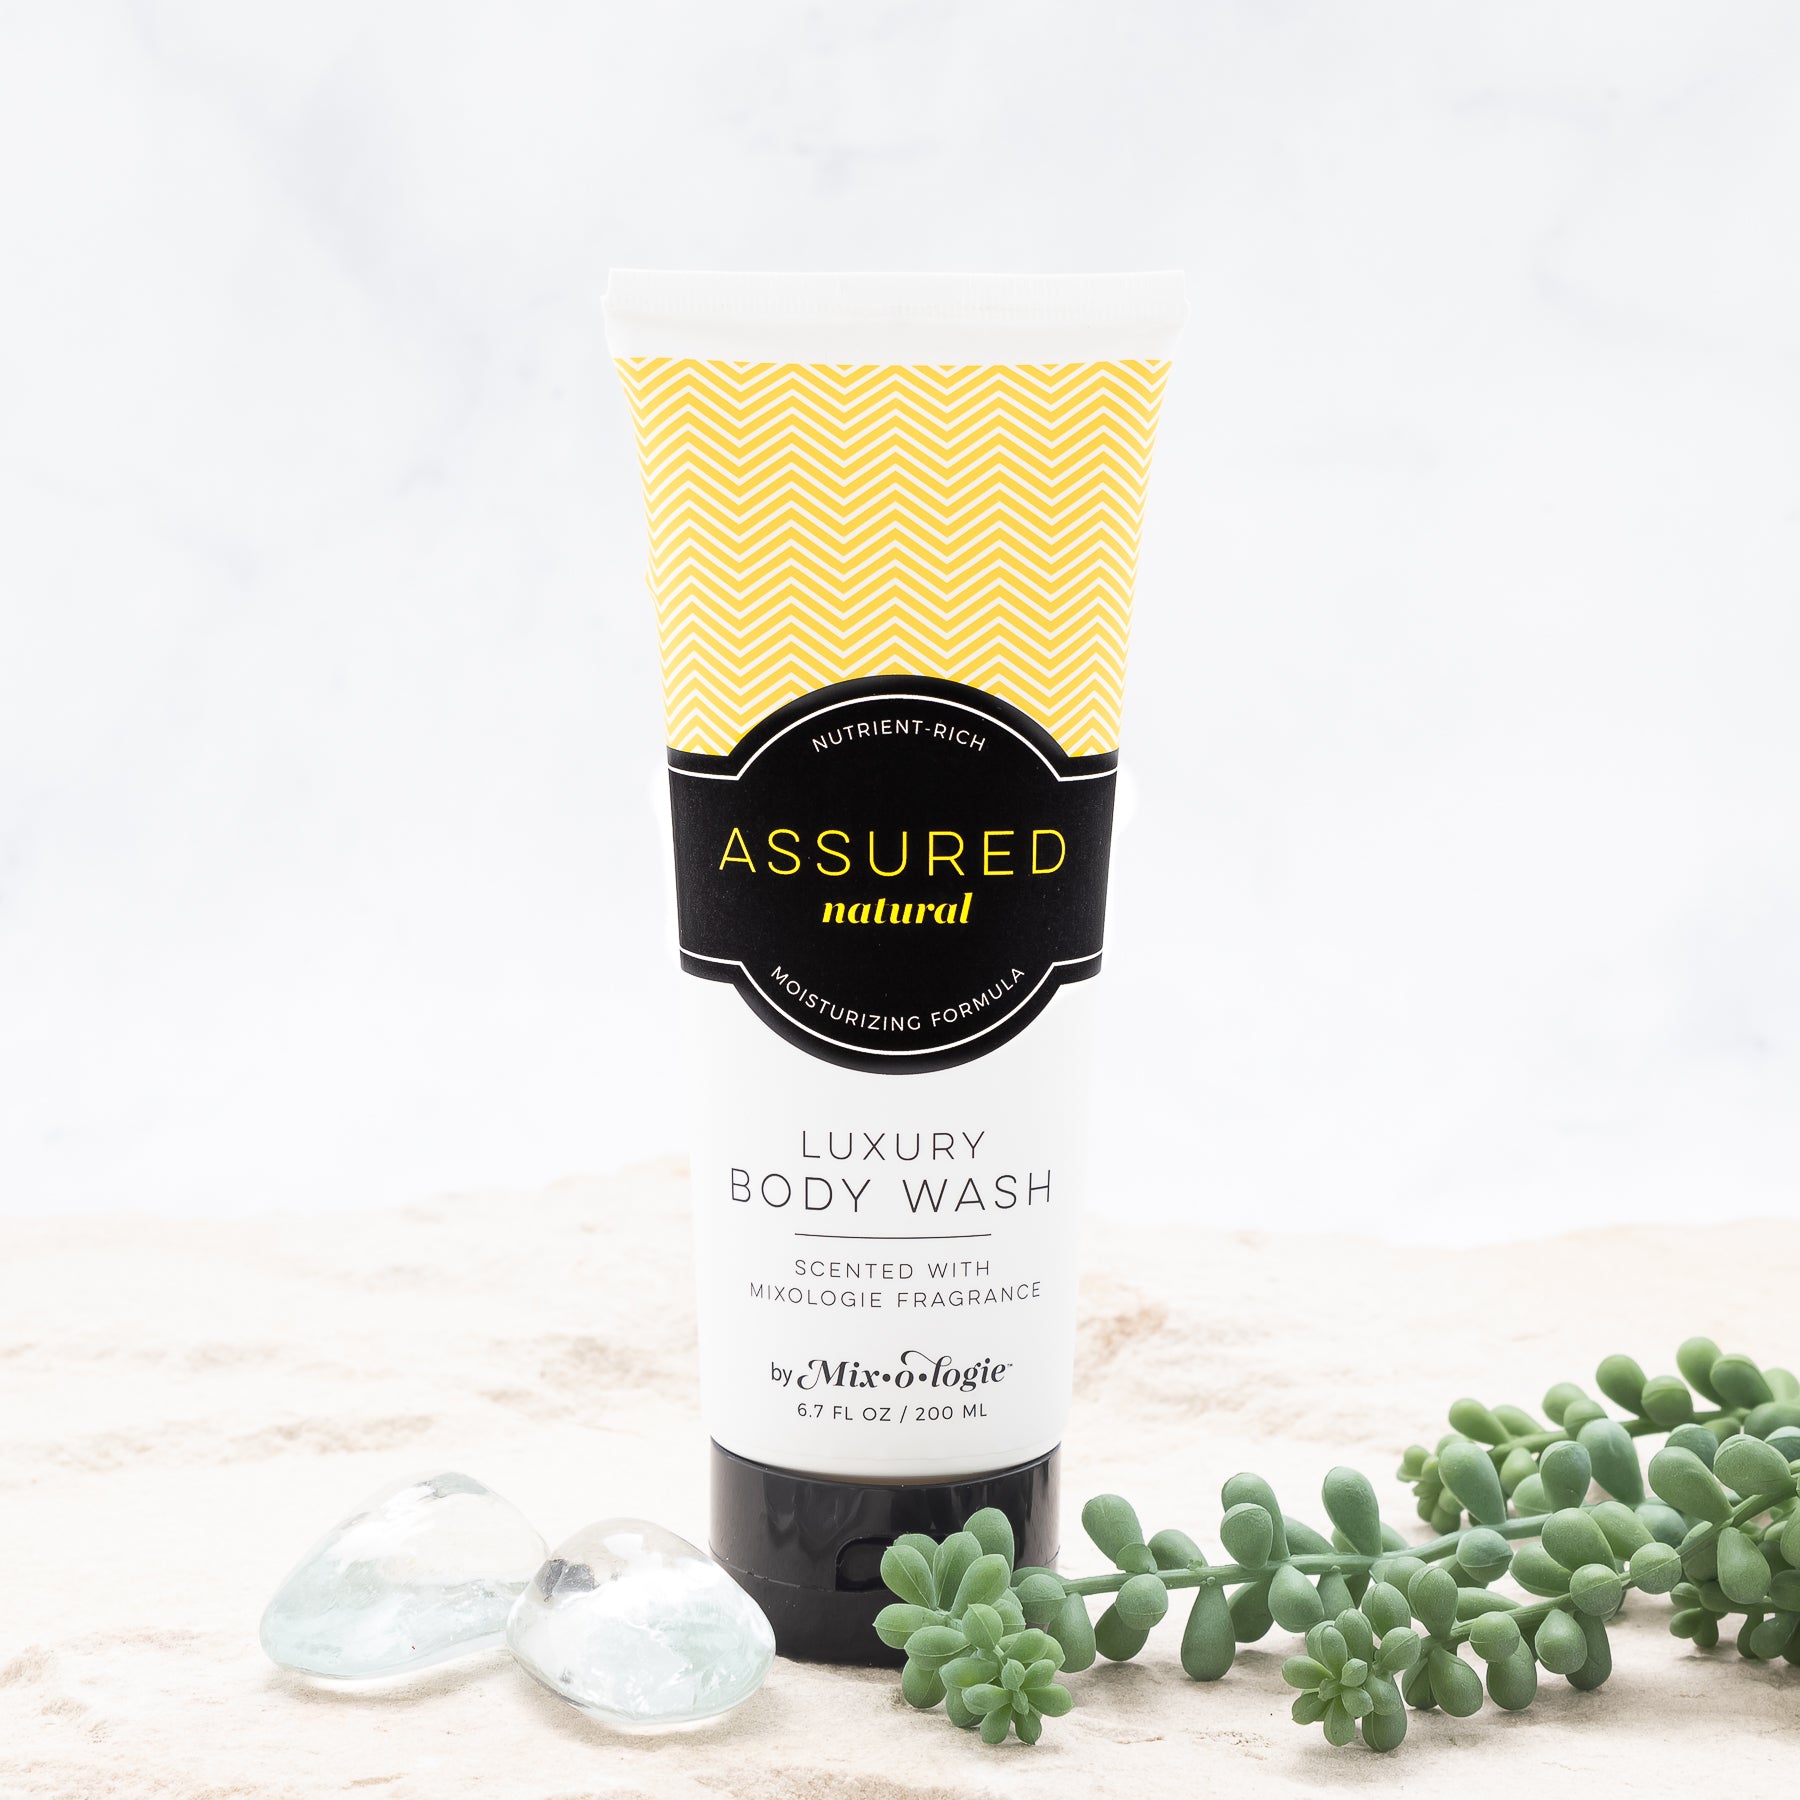 Luxury Body Wash in Mixologie’s Assured (Natural) in yellow color sample package with black label. Contains 6.7 fl oz or 200 mL pictured on a white background. 